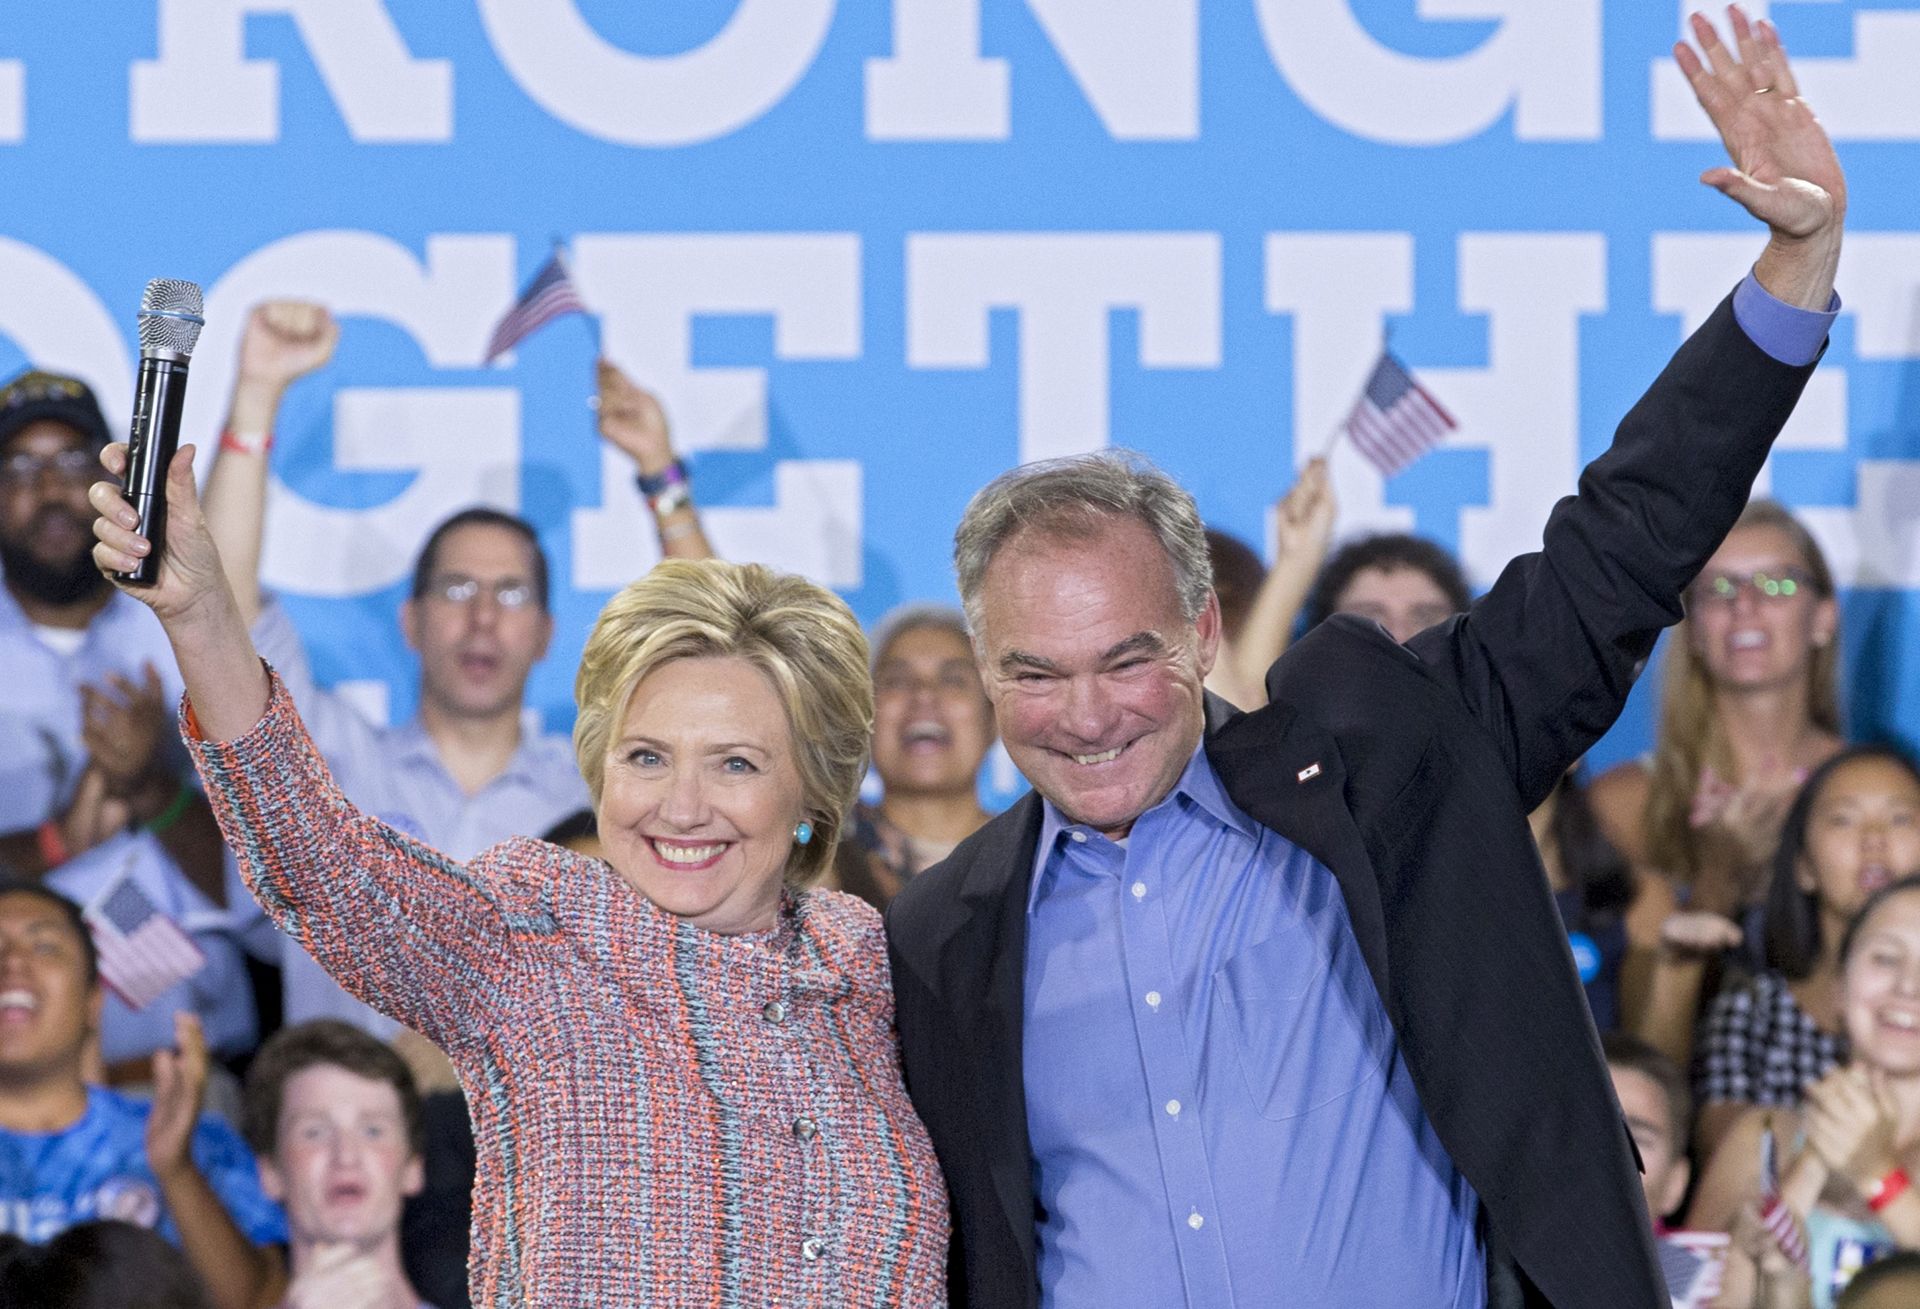 epa05437345 (FILE) A file picture dated 14 July 2016 shows US Democratic presidential candidate Hillary Clinton (L) campaigning with Democratic Senator from Virginia Tim Kaine (R), at Ernst Community Cultural Center at the Northern Virginia Community College's Annandale campus, in Annandale, Virginia, USA. US Democratic presidential candidate Hillary Clinton selected on 22 July 2016, Democratic Senator from Virginia Tim Kaine to be her pick as running mate for the presidential elections. According to media reports, Clinton is planning to make a formal announcement on 23 July 2016.  EPA/MICHAEL REYNOLDS